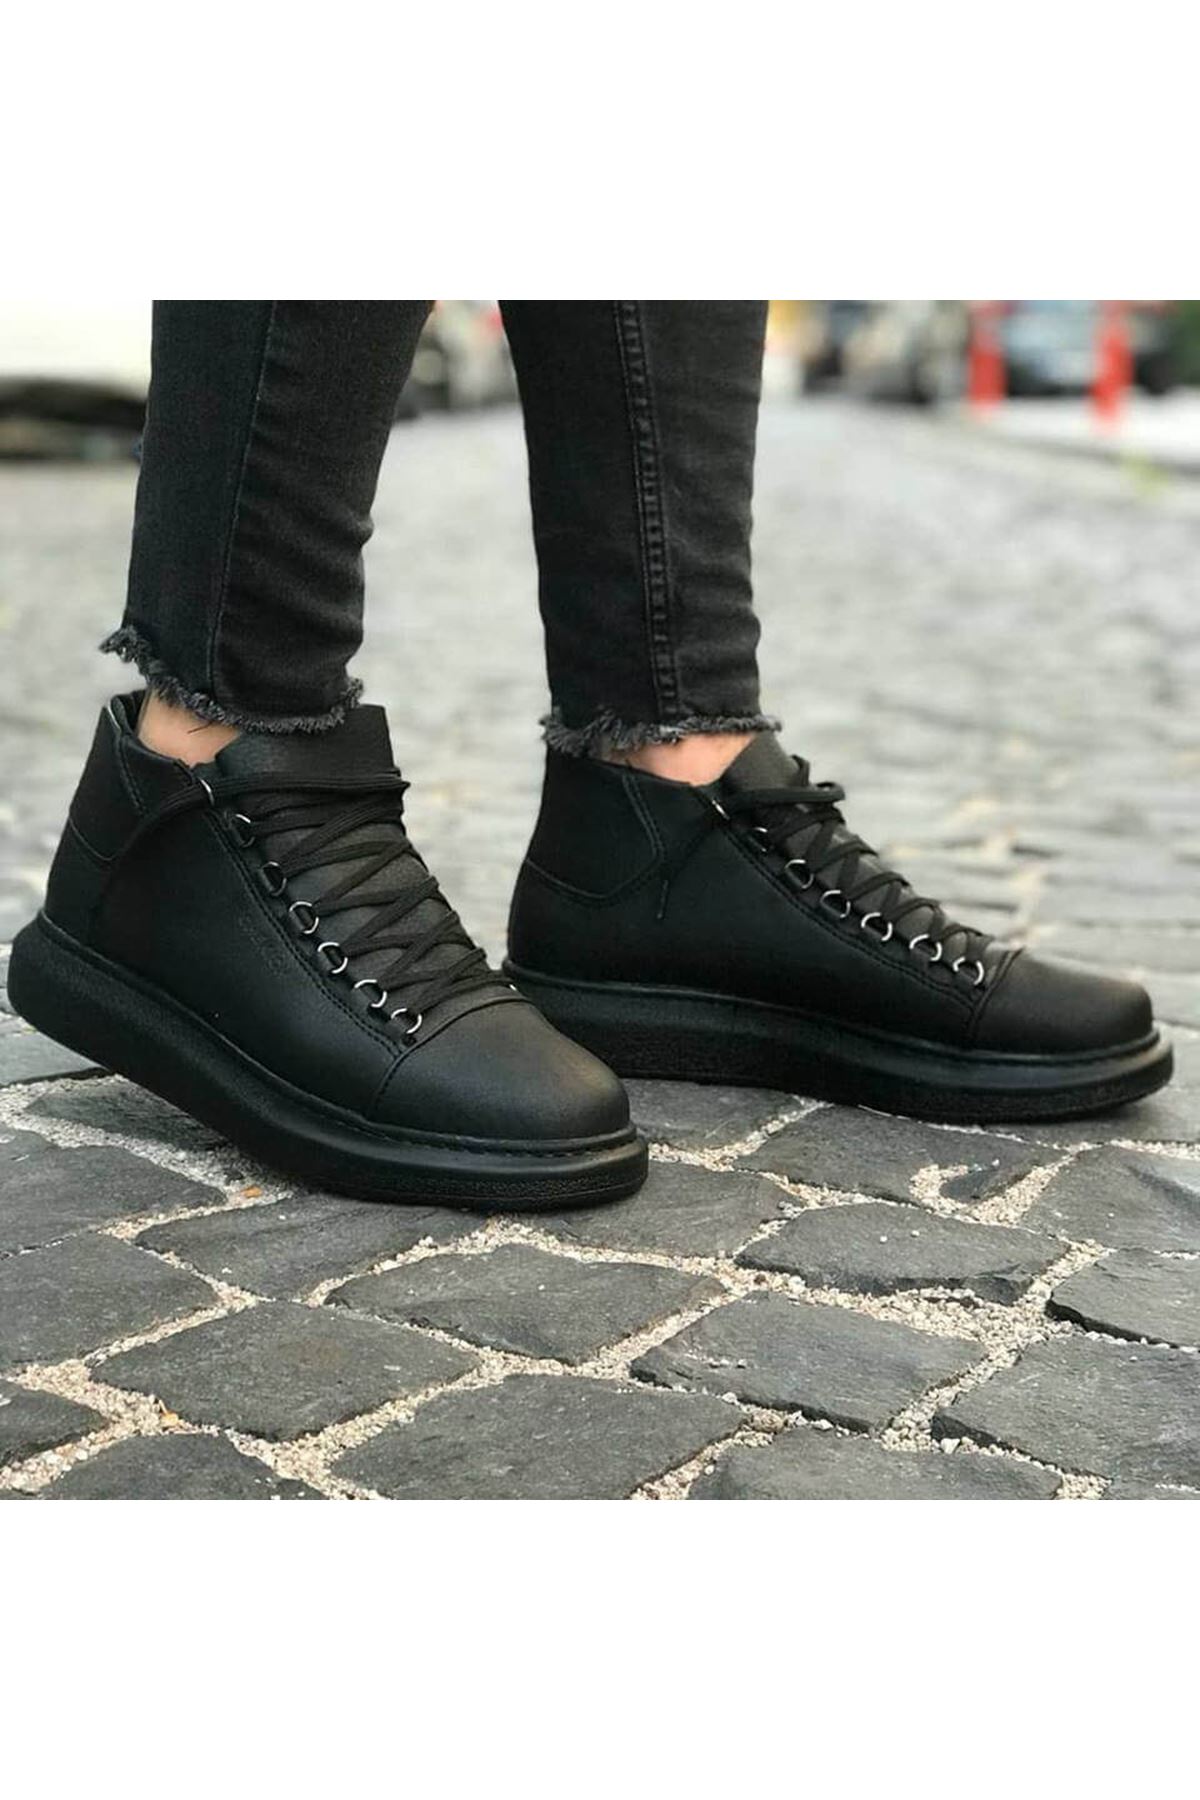 Chekich Men's and Women's Shoes Navy Blue Artificial Leather Winter Fall Seasons Lace Up Sneakers Comfortable Ankle Gentlemens & Ladies Fashion Boots Flexible Footwear Flat Wedding New Trends Travel Plus Size CH258 V4